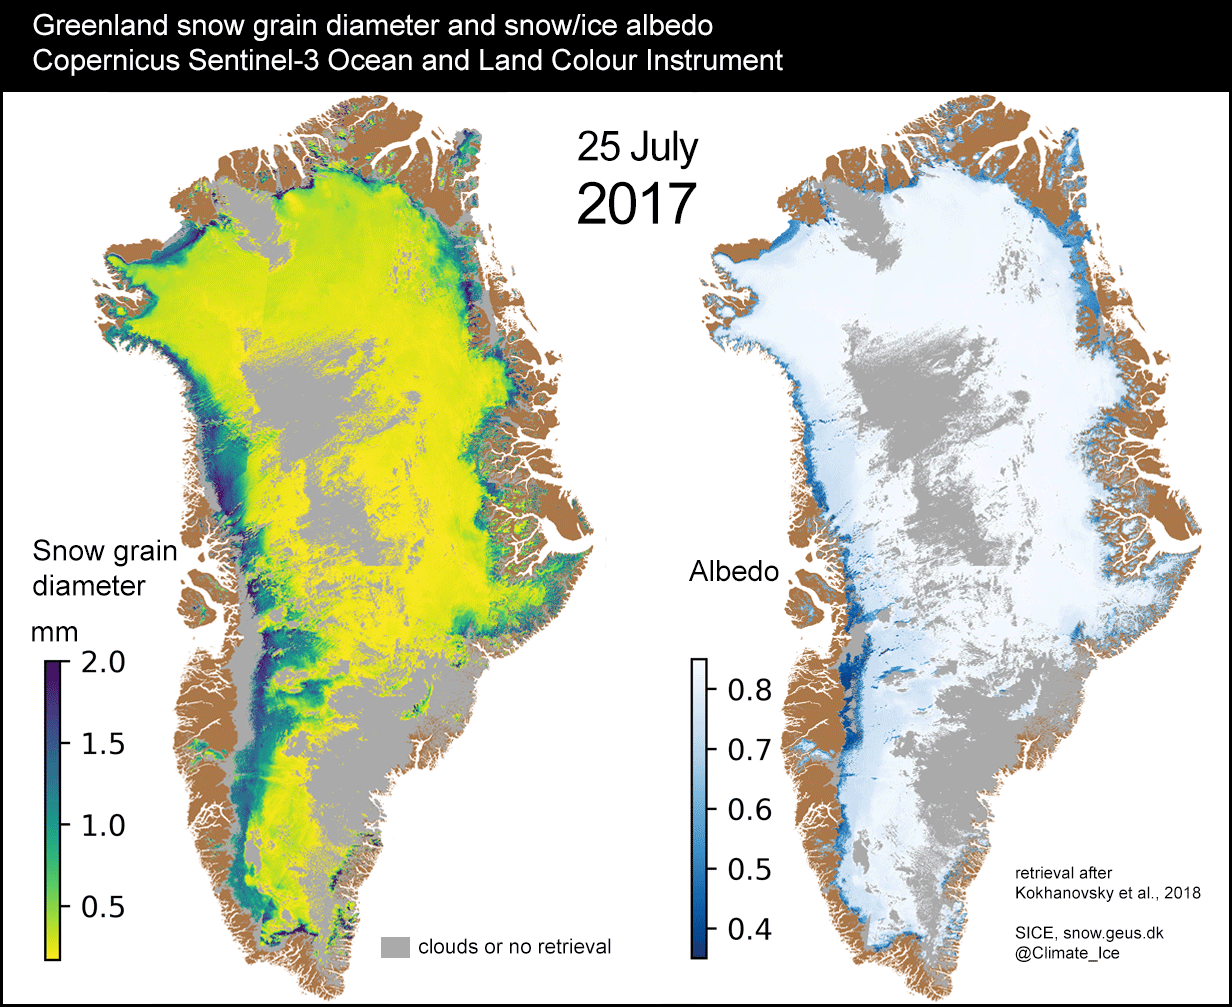 Figure 15: Greenland snow grain and albedo. A sequence of snow grain size and albedo from the Copernicus Sentinel-3 satellites' OLCI (Ocean Land and Color Instruments). The animation illustrates a view through clear skies to the surface of the Greenland ice sheet where warming causes snow grain growth and reduced albedo. The darkest albedo areas are where snow melt gives way to bare glacier ice that melts even faster than snow cover, highlighting the fact that snow and ice are sensitive responders to weather and climate (image credit: GEUS–J. Box/ESA)